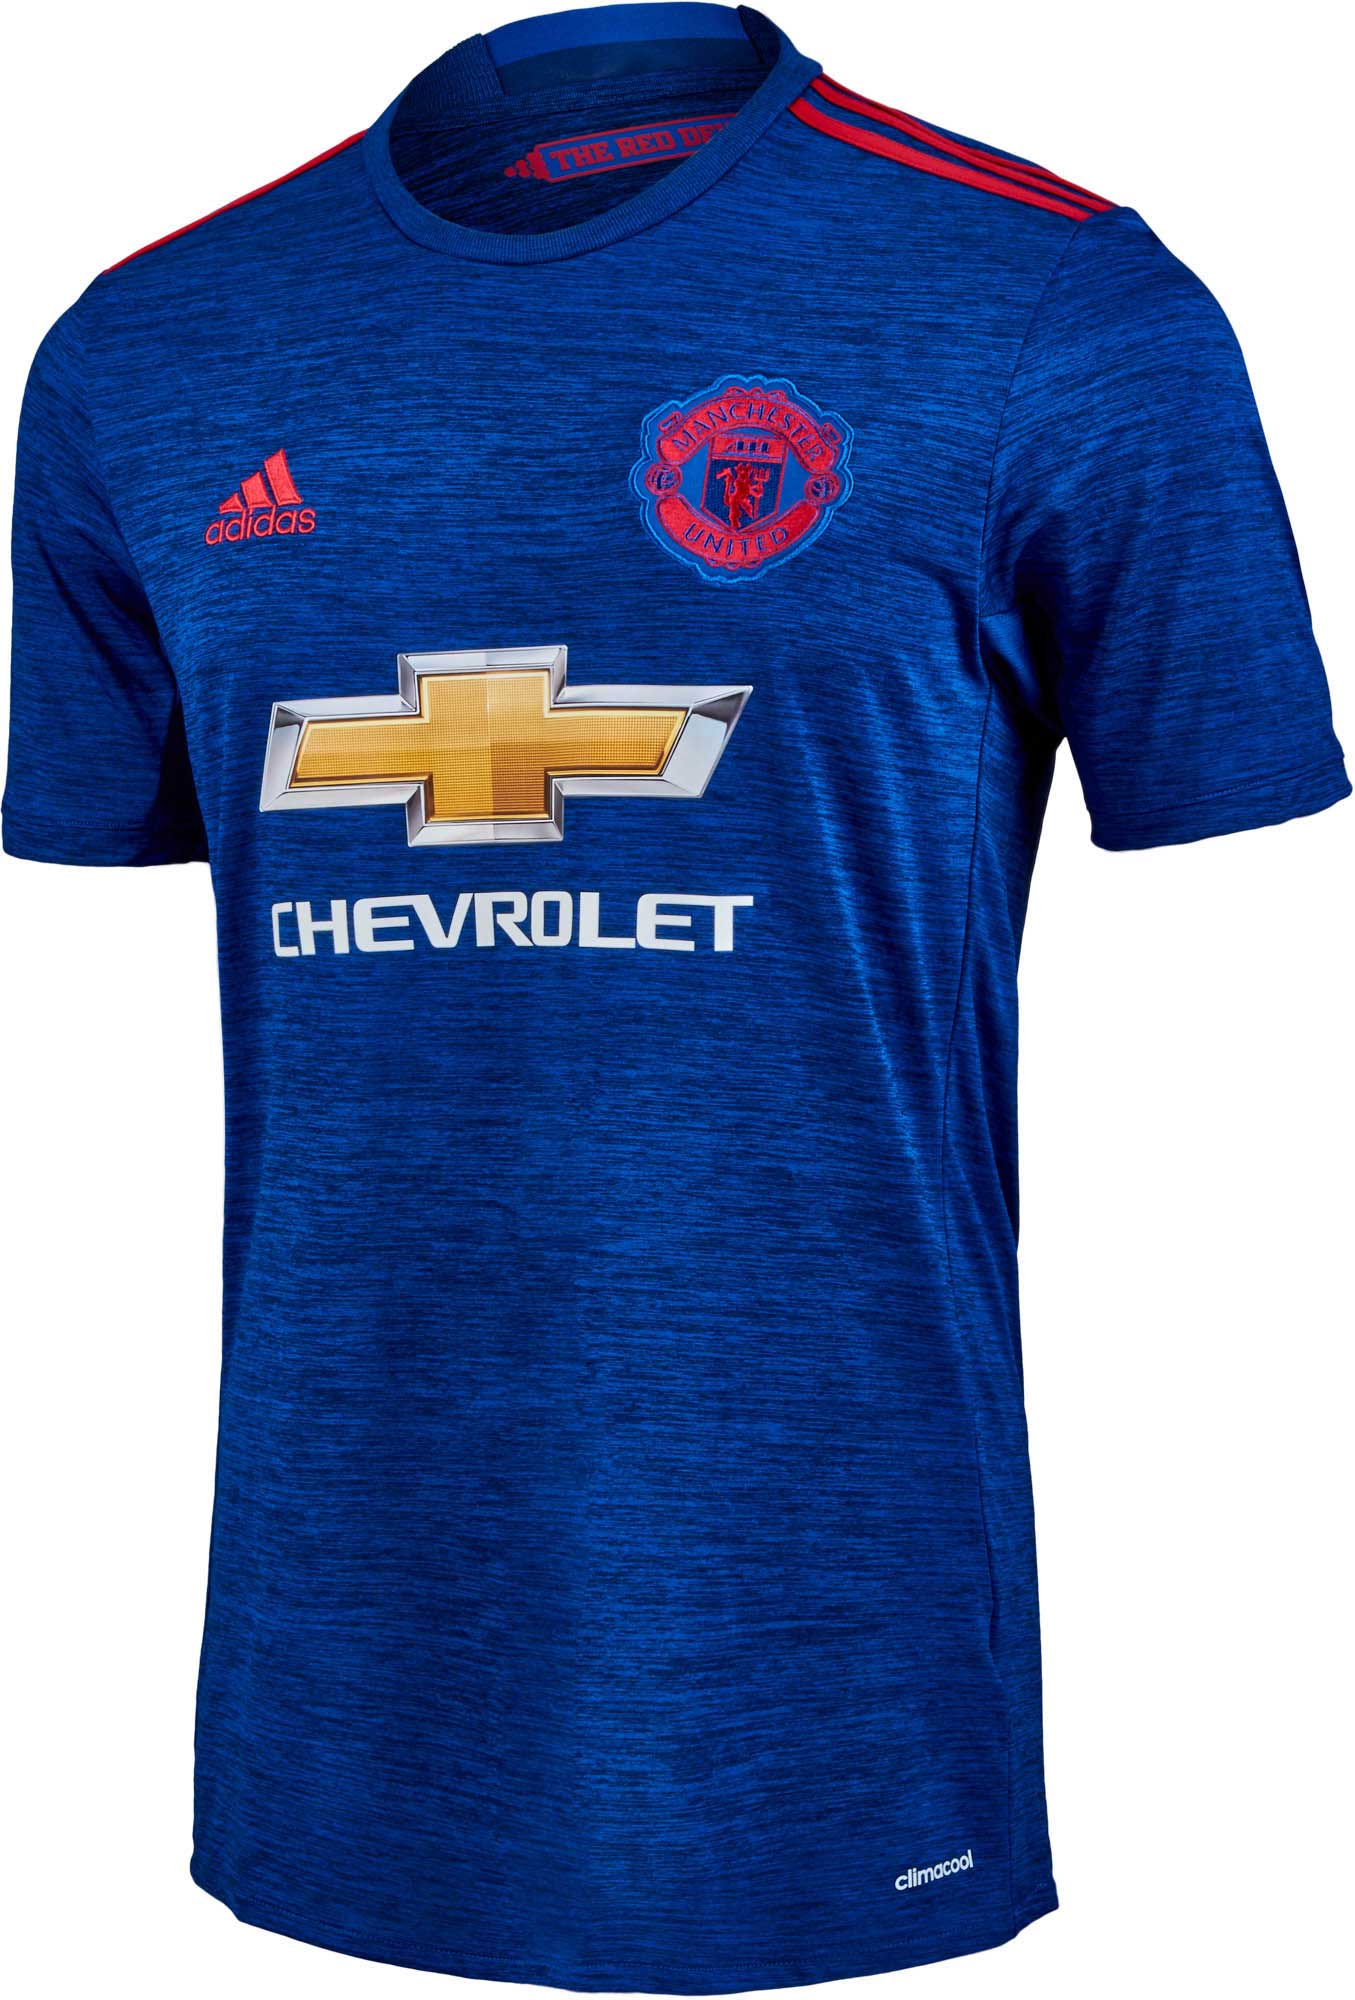 adidas Manchester United Jersey - 2016 Manchester United Away Jerseys